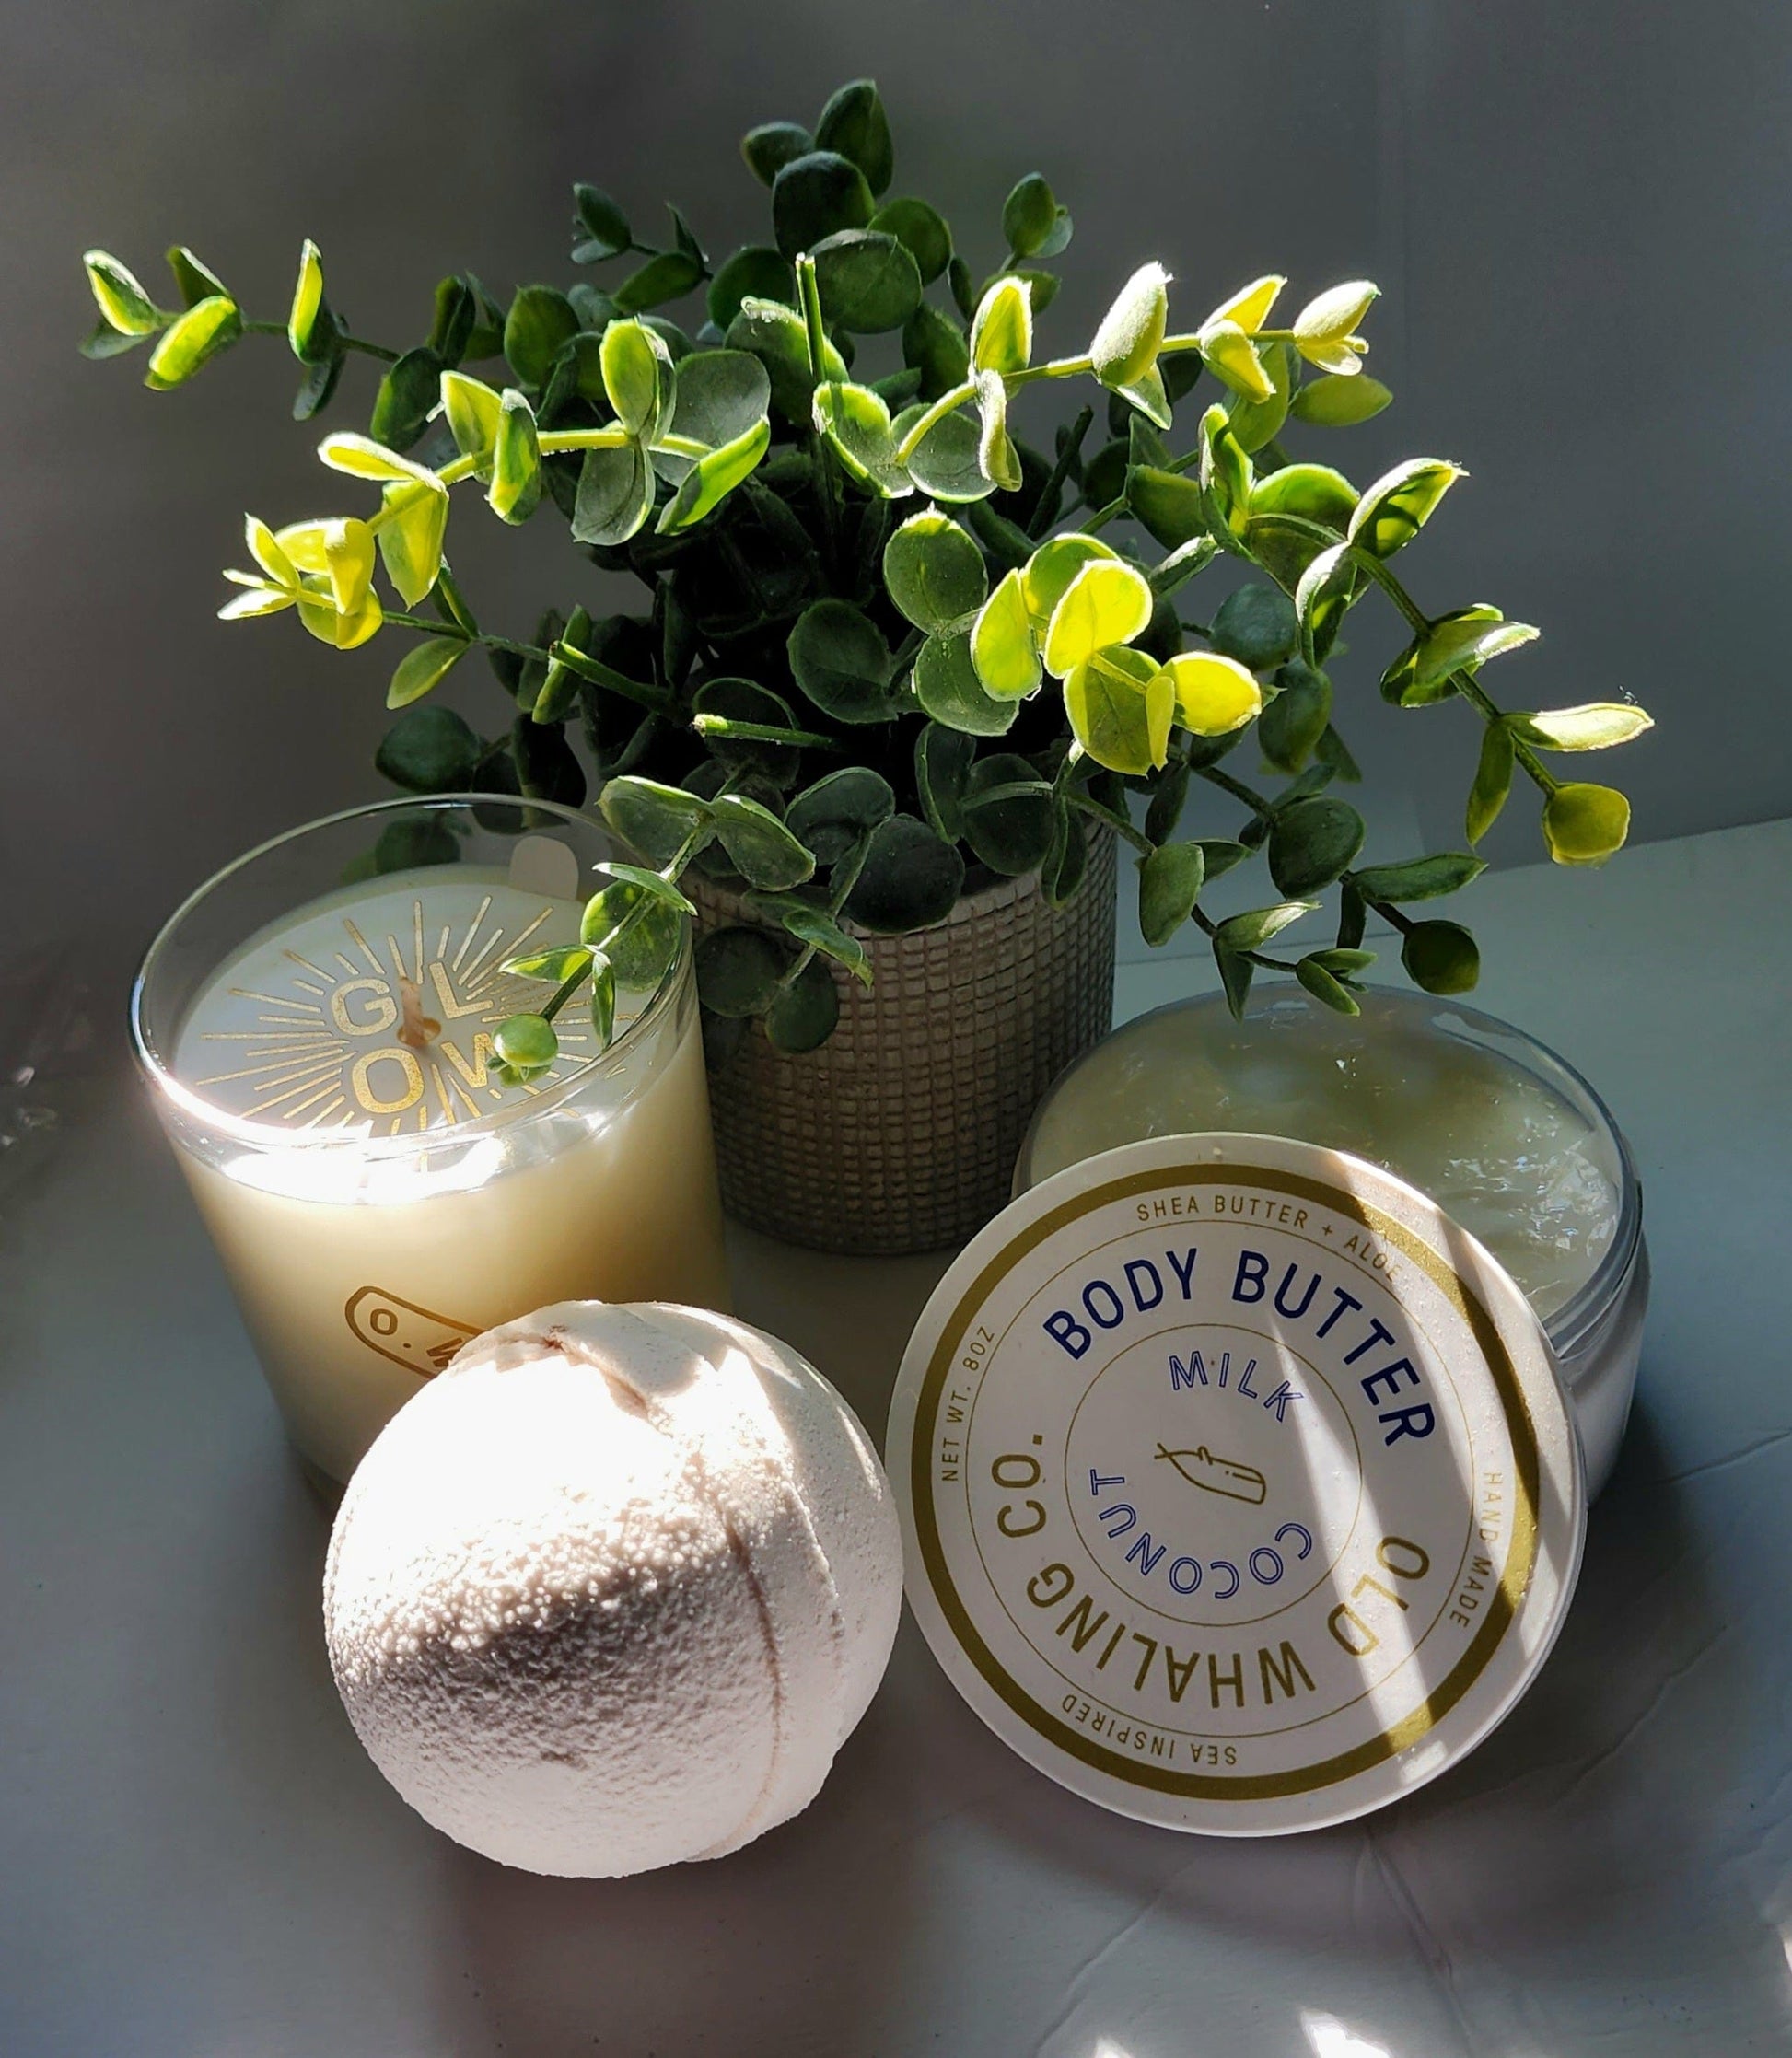 Old Whaling Company Bath & Body Coconut Milk Bomb, Body Butter & Candle Set Press on Nails Self Care Accessories